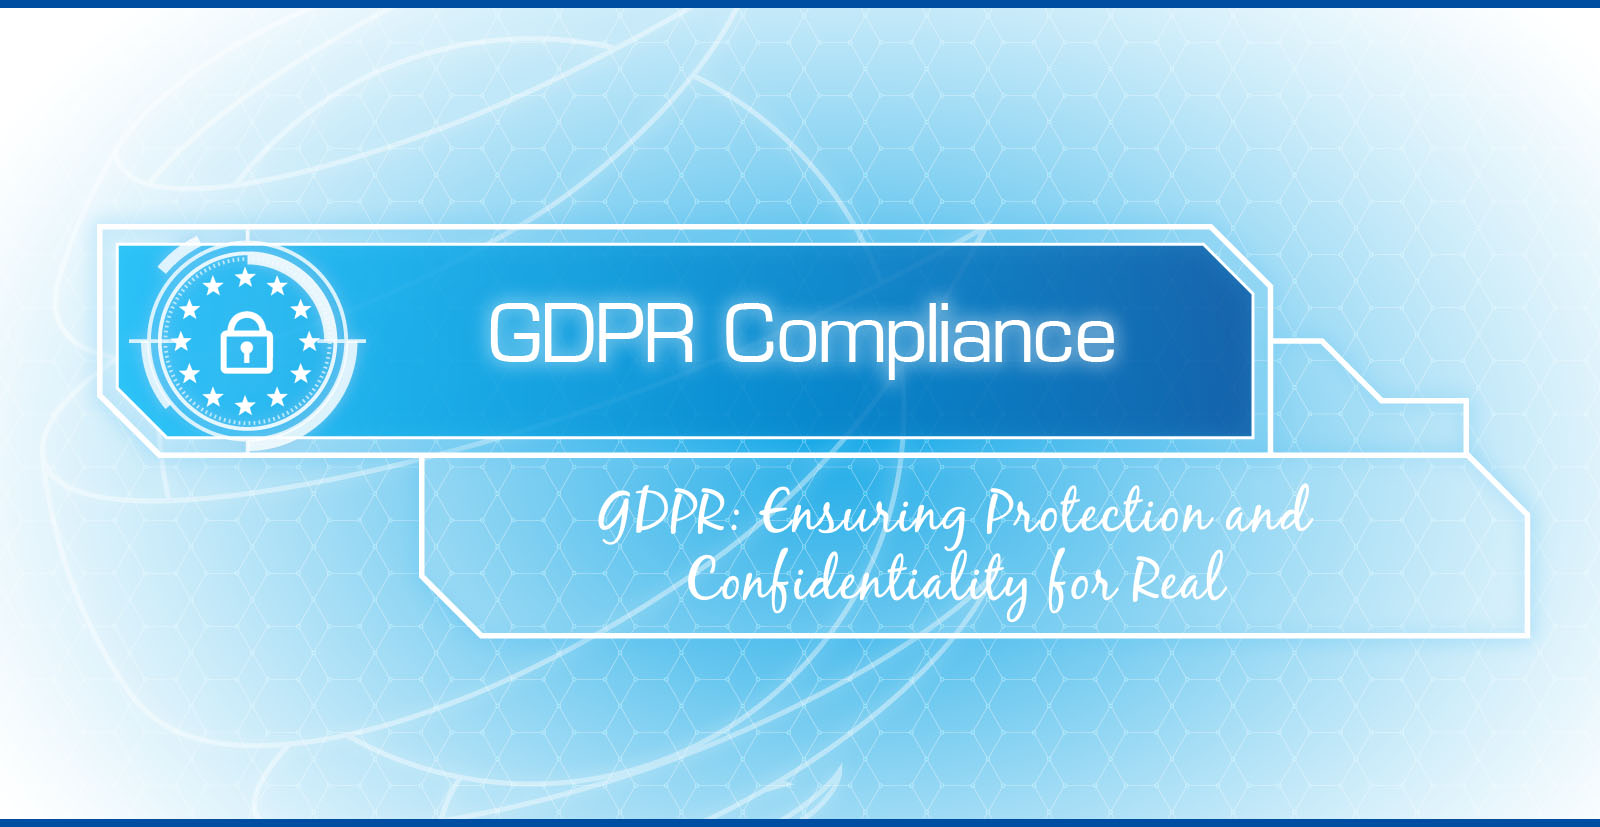 GDPR Compliance for Website and Companies